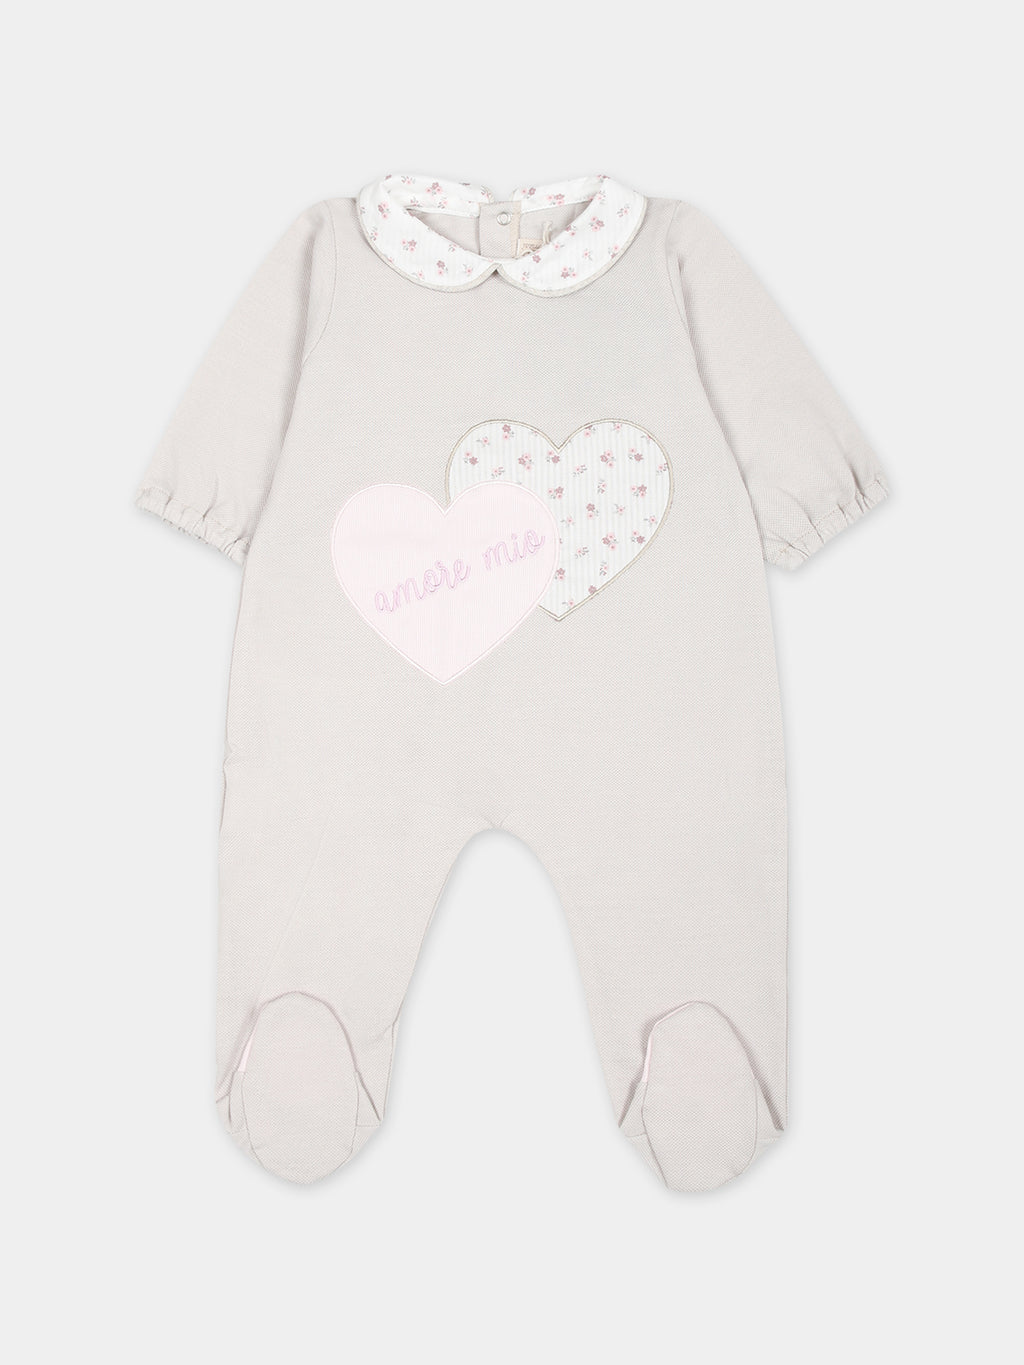 Beige babygrow for baby girl with hearts and writing